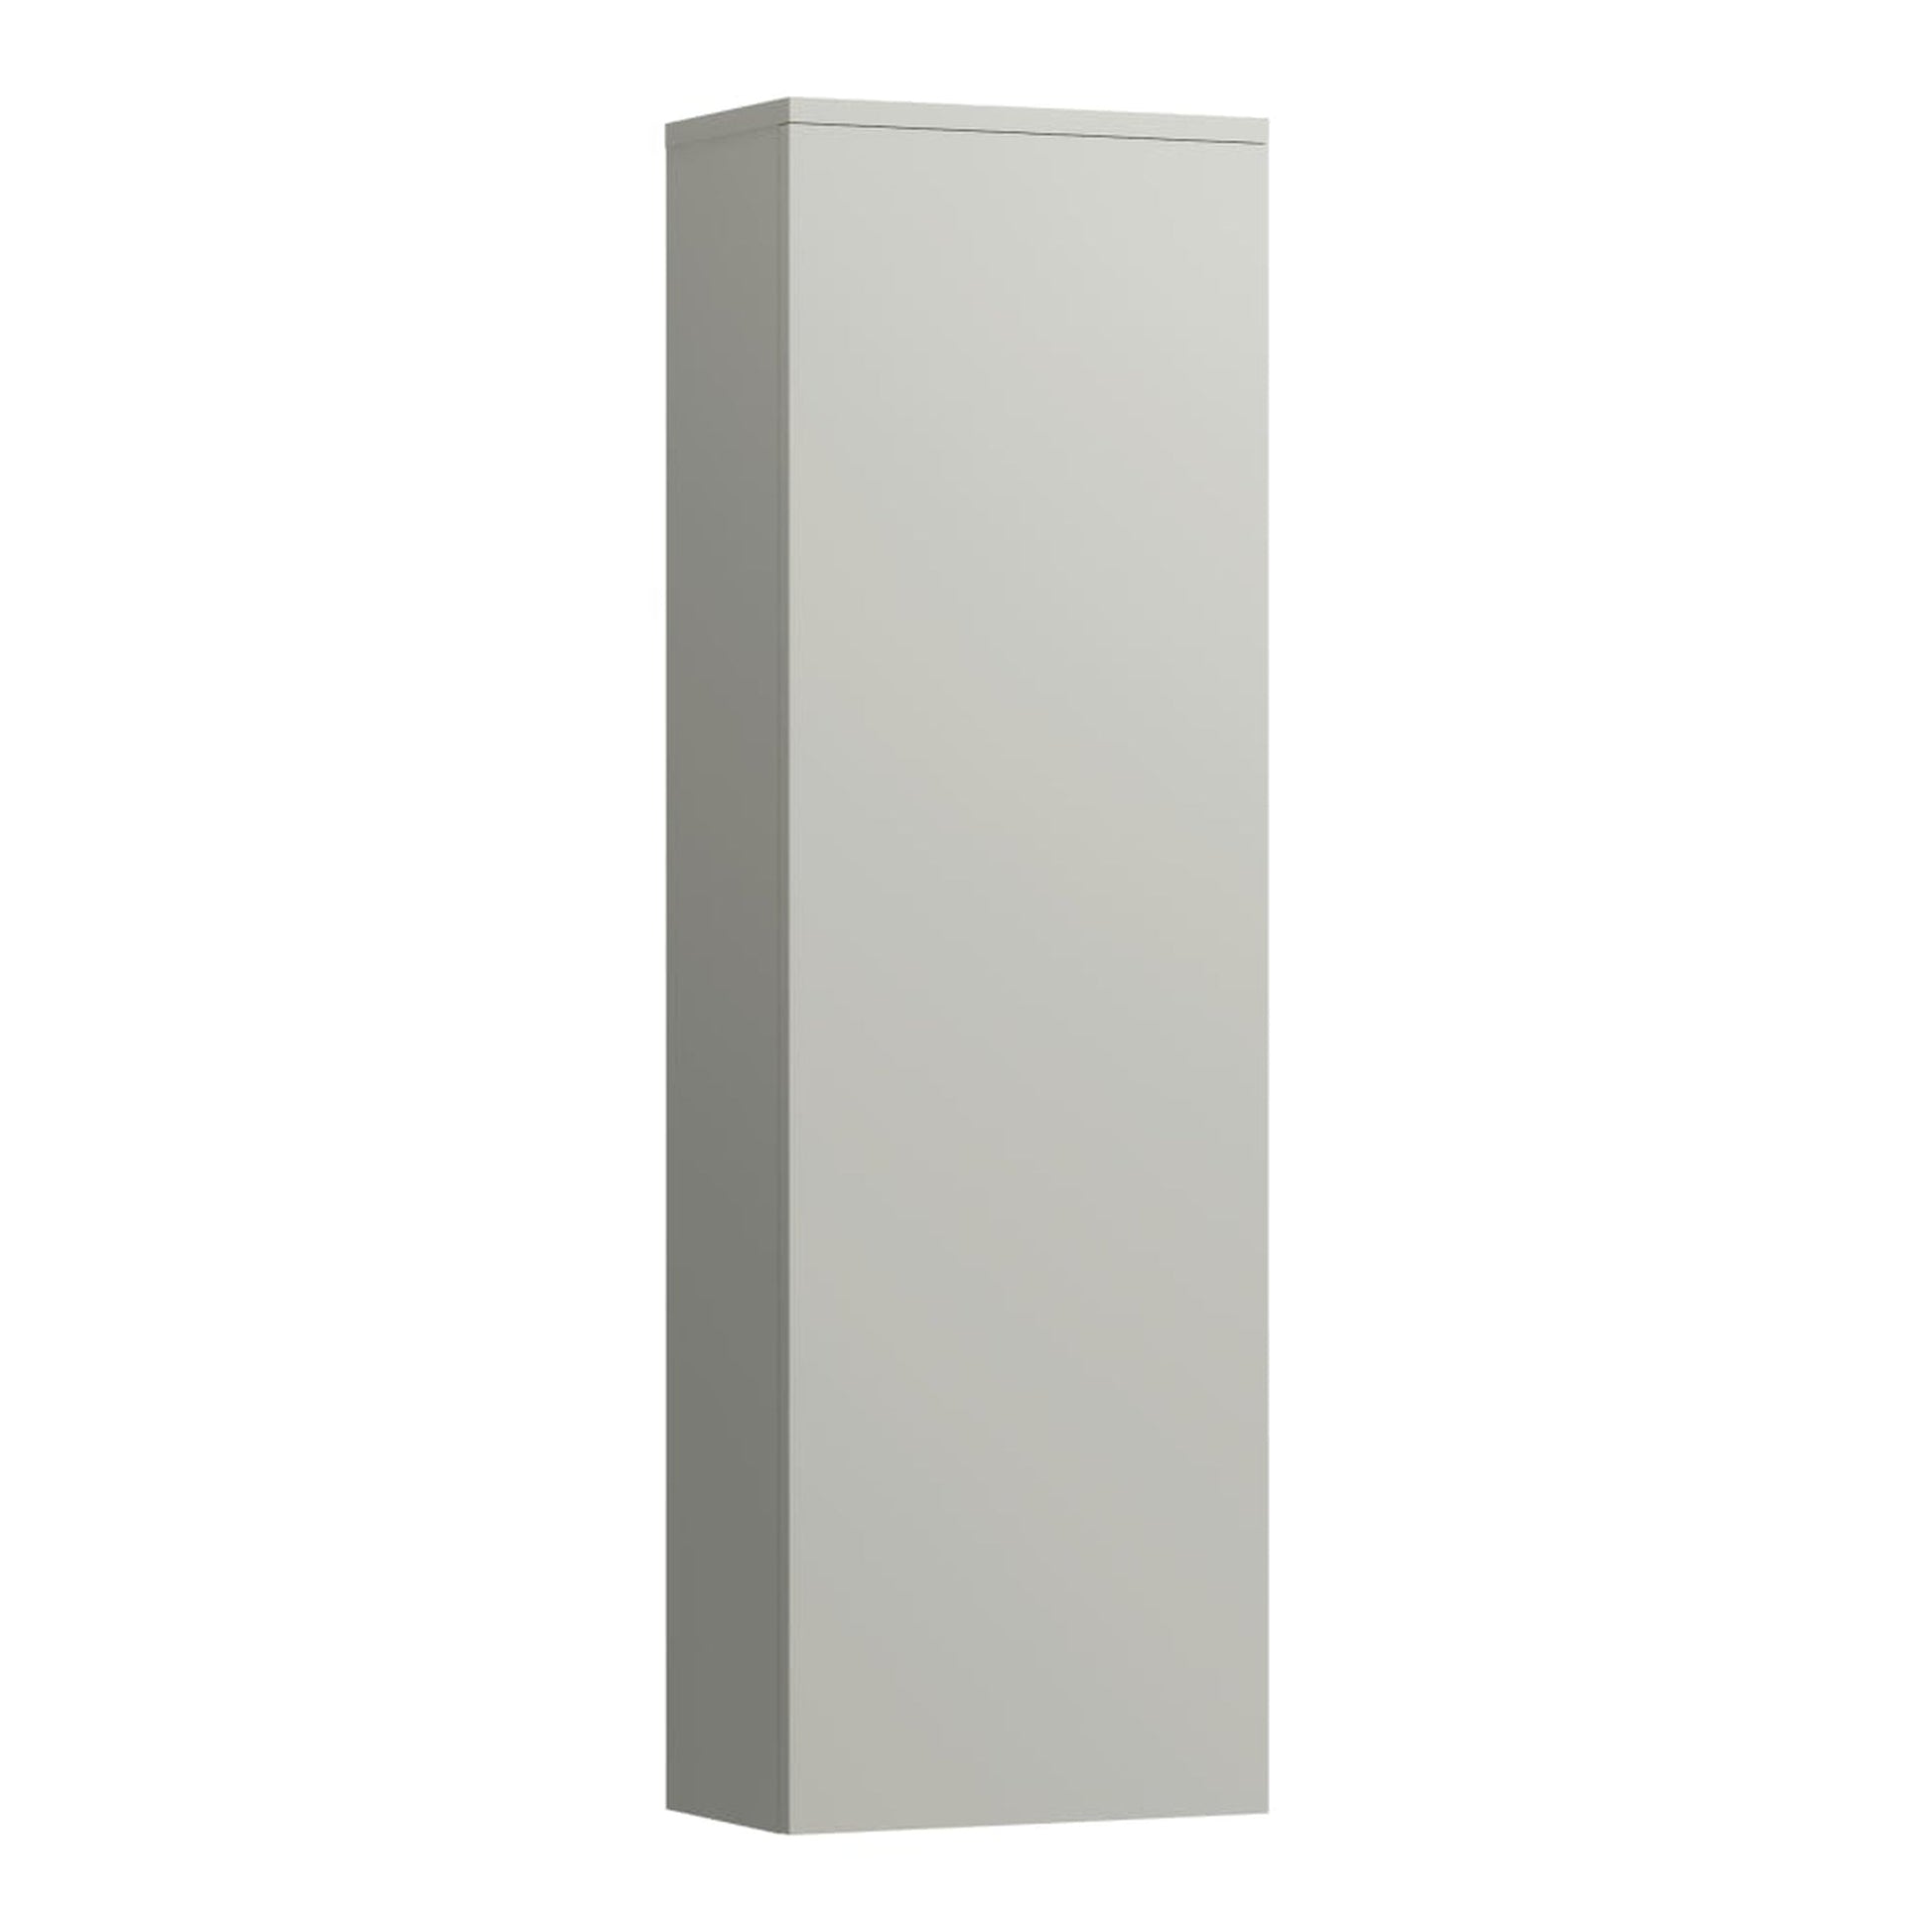 Laufen Kartell 16" x 51" 1-Door Right-Hinged Pebble Gray Wall-Mounted Tall Cabinet With 4 Fixed Glass Shelves